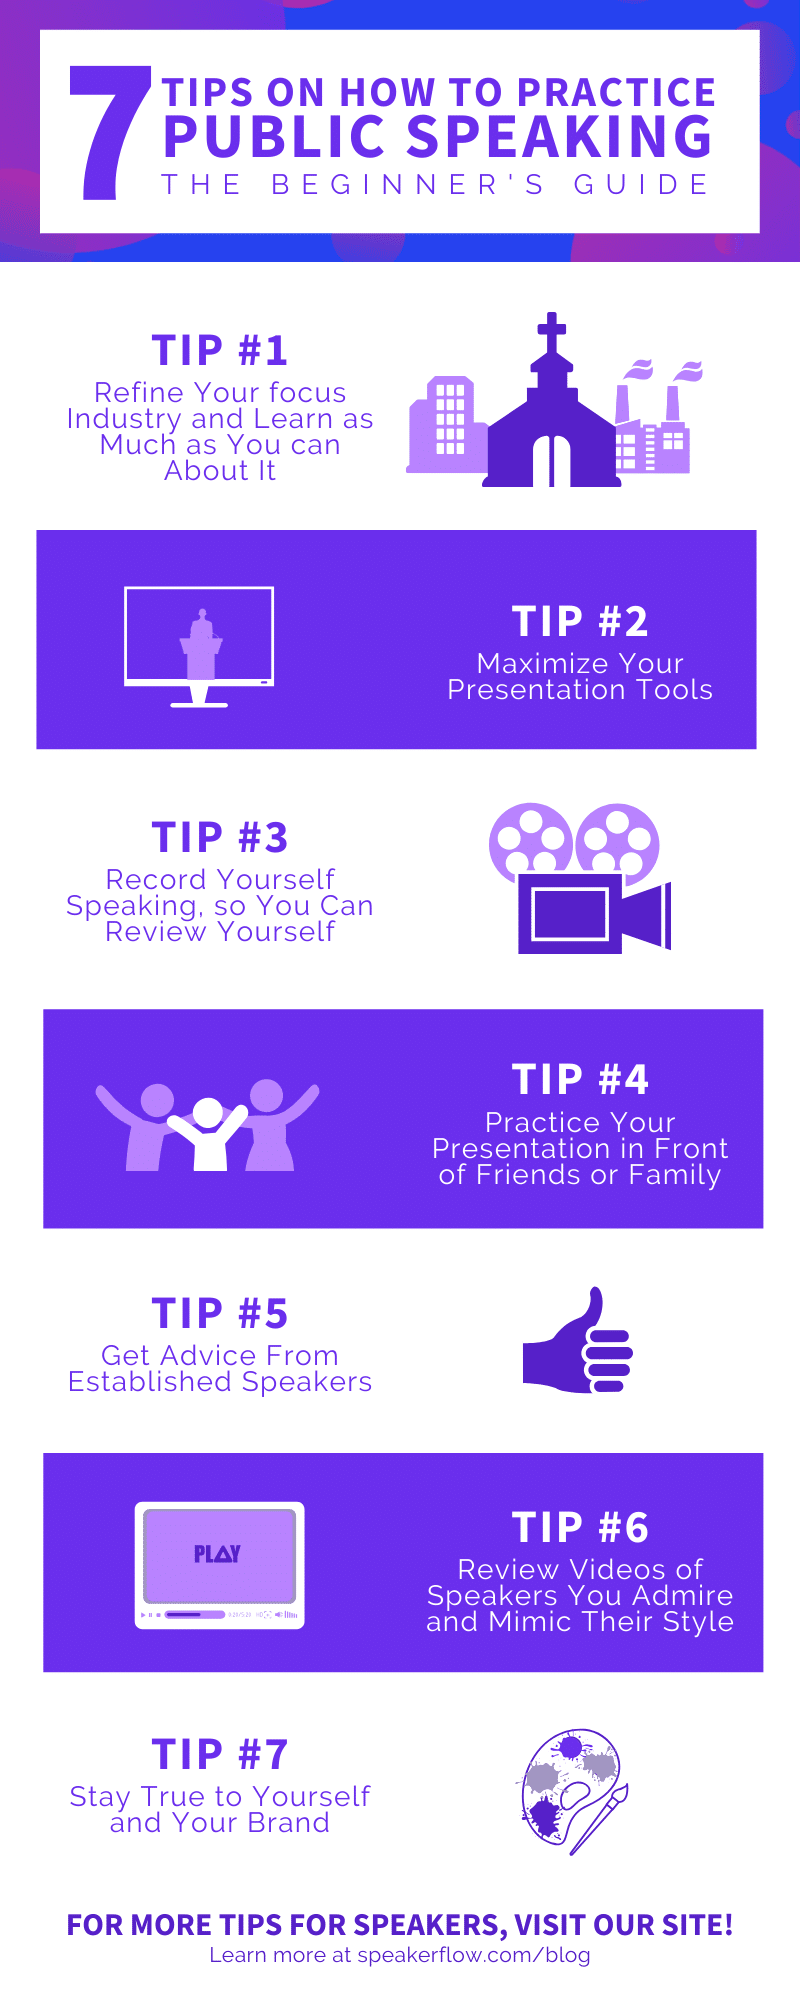 Infographic for 7 Tips On How To Practice Public Speaking The Beginner's Guide - SpeakerFlow